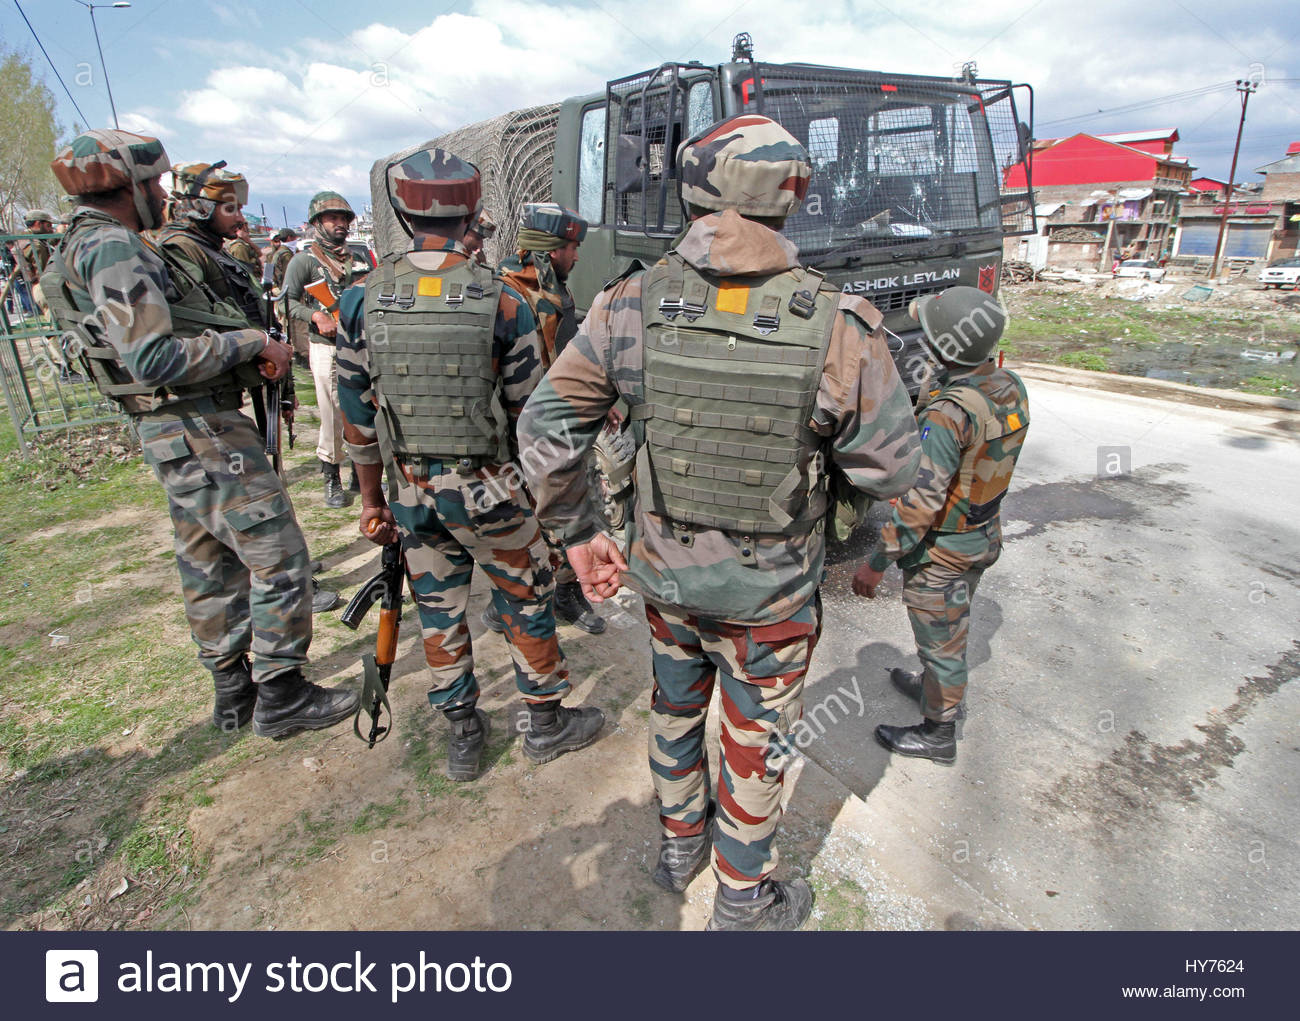 india-01st-apr-2017-indian-army-soldiers-stand-near-the-damaged-vehicle-HY7624.jpg